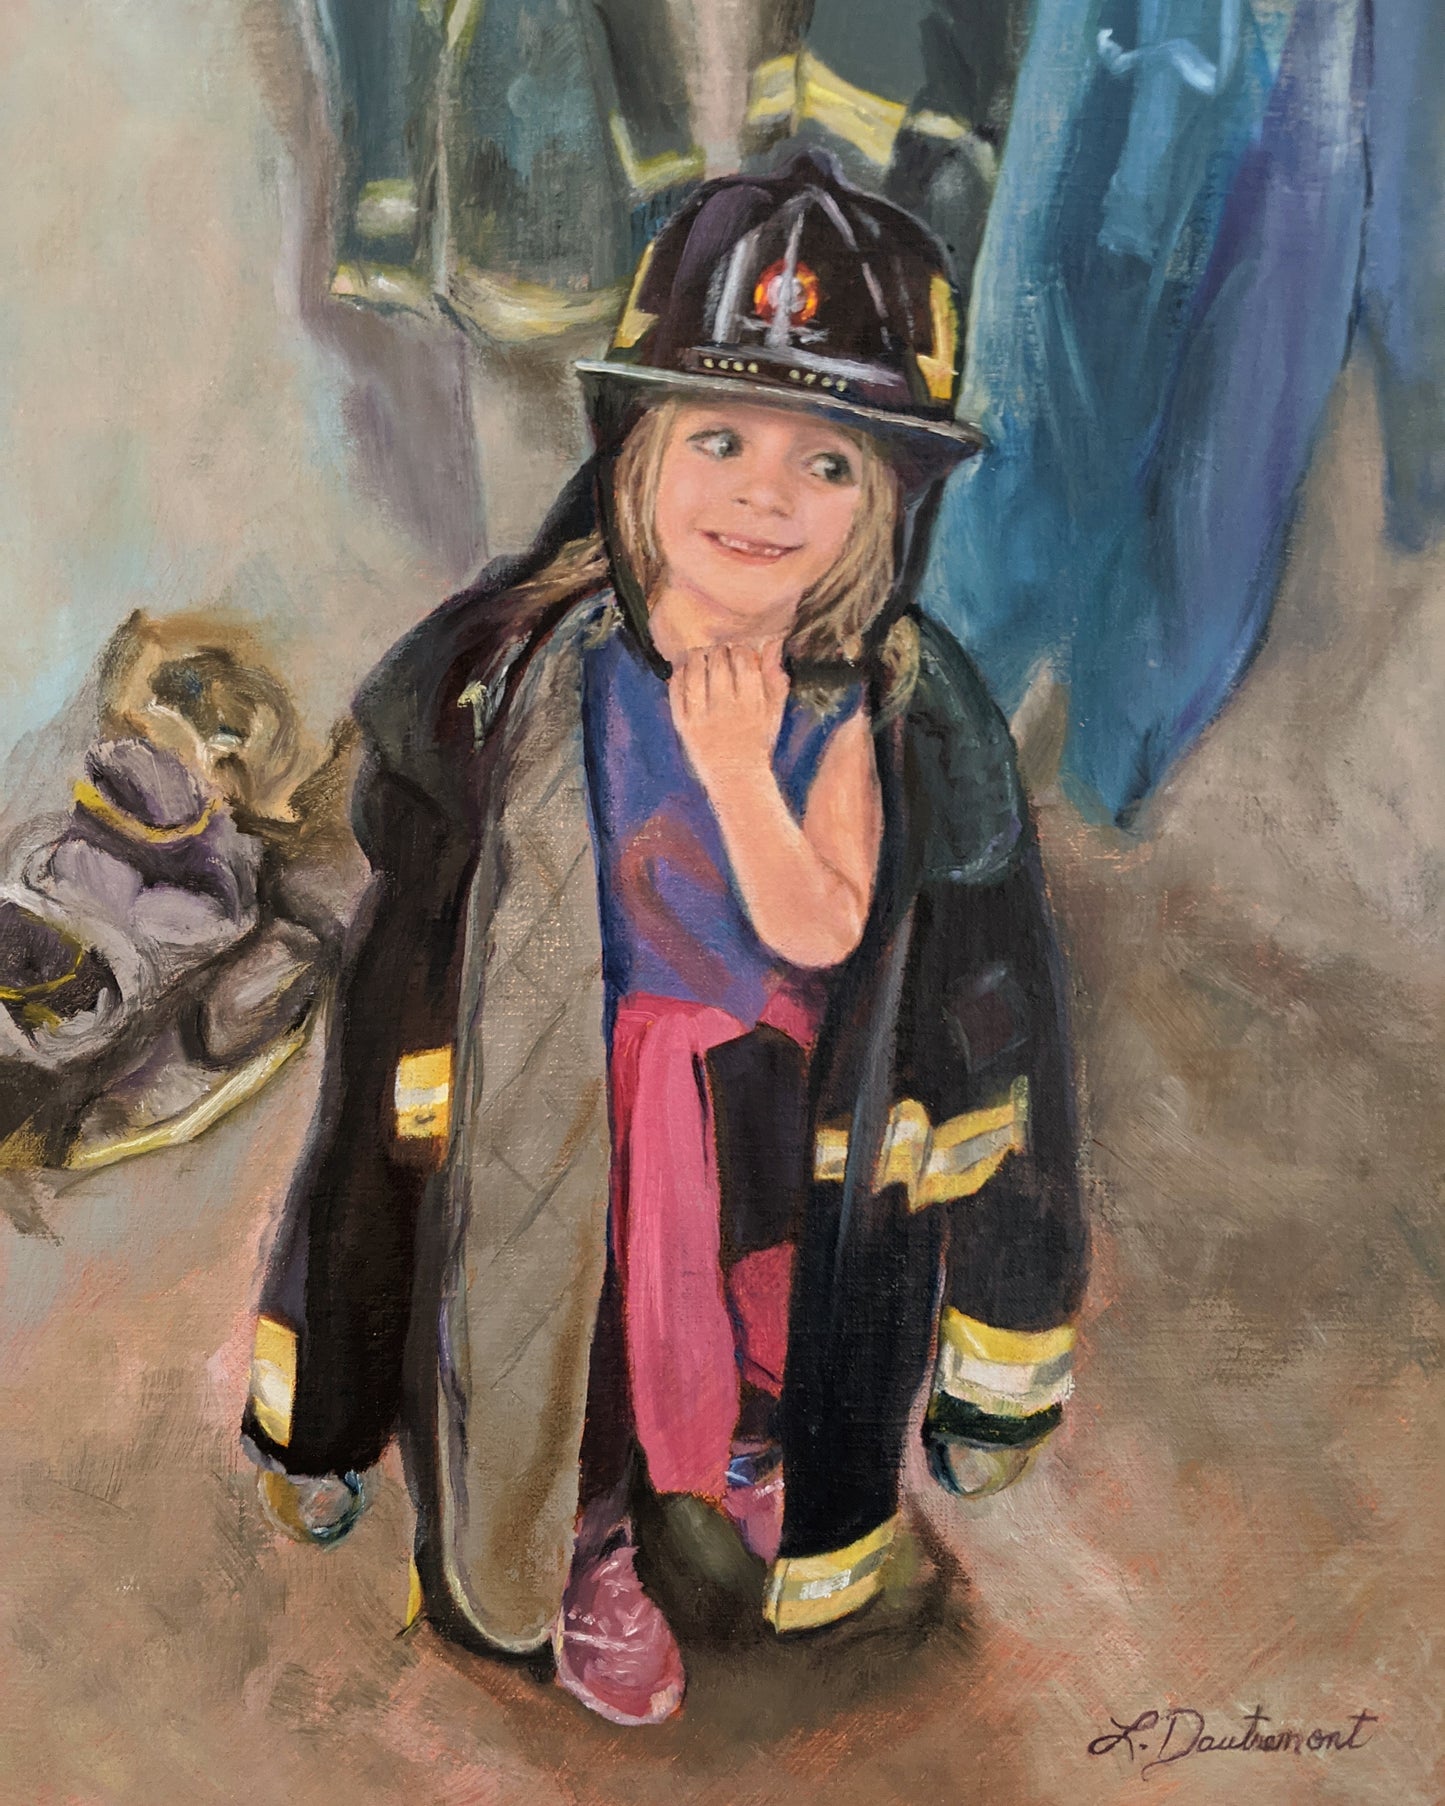 Lisa Dautremont - The Firefighter’s Daughter